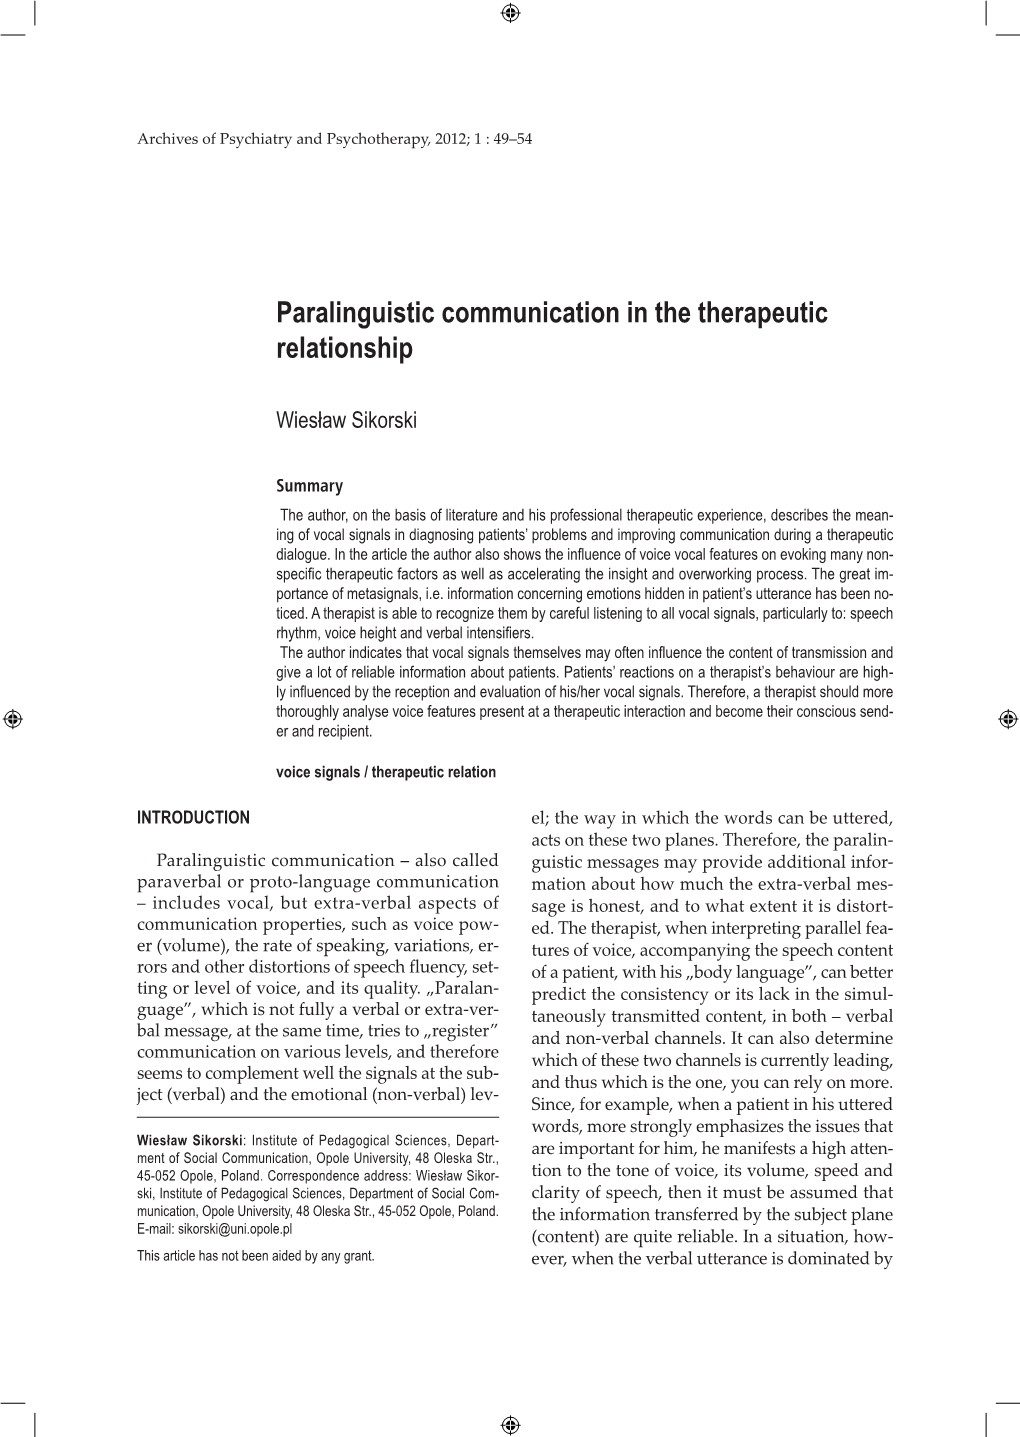 Paralinguistic Communication in the Therapeutic Relationship